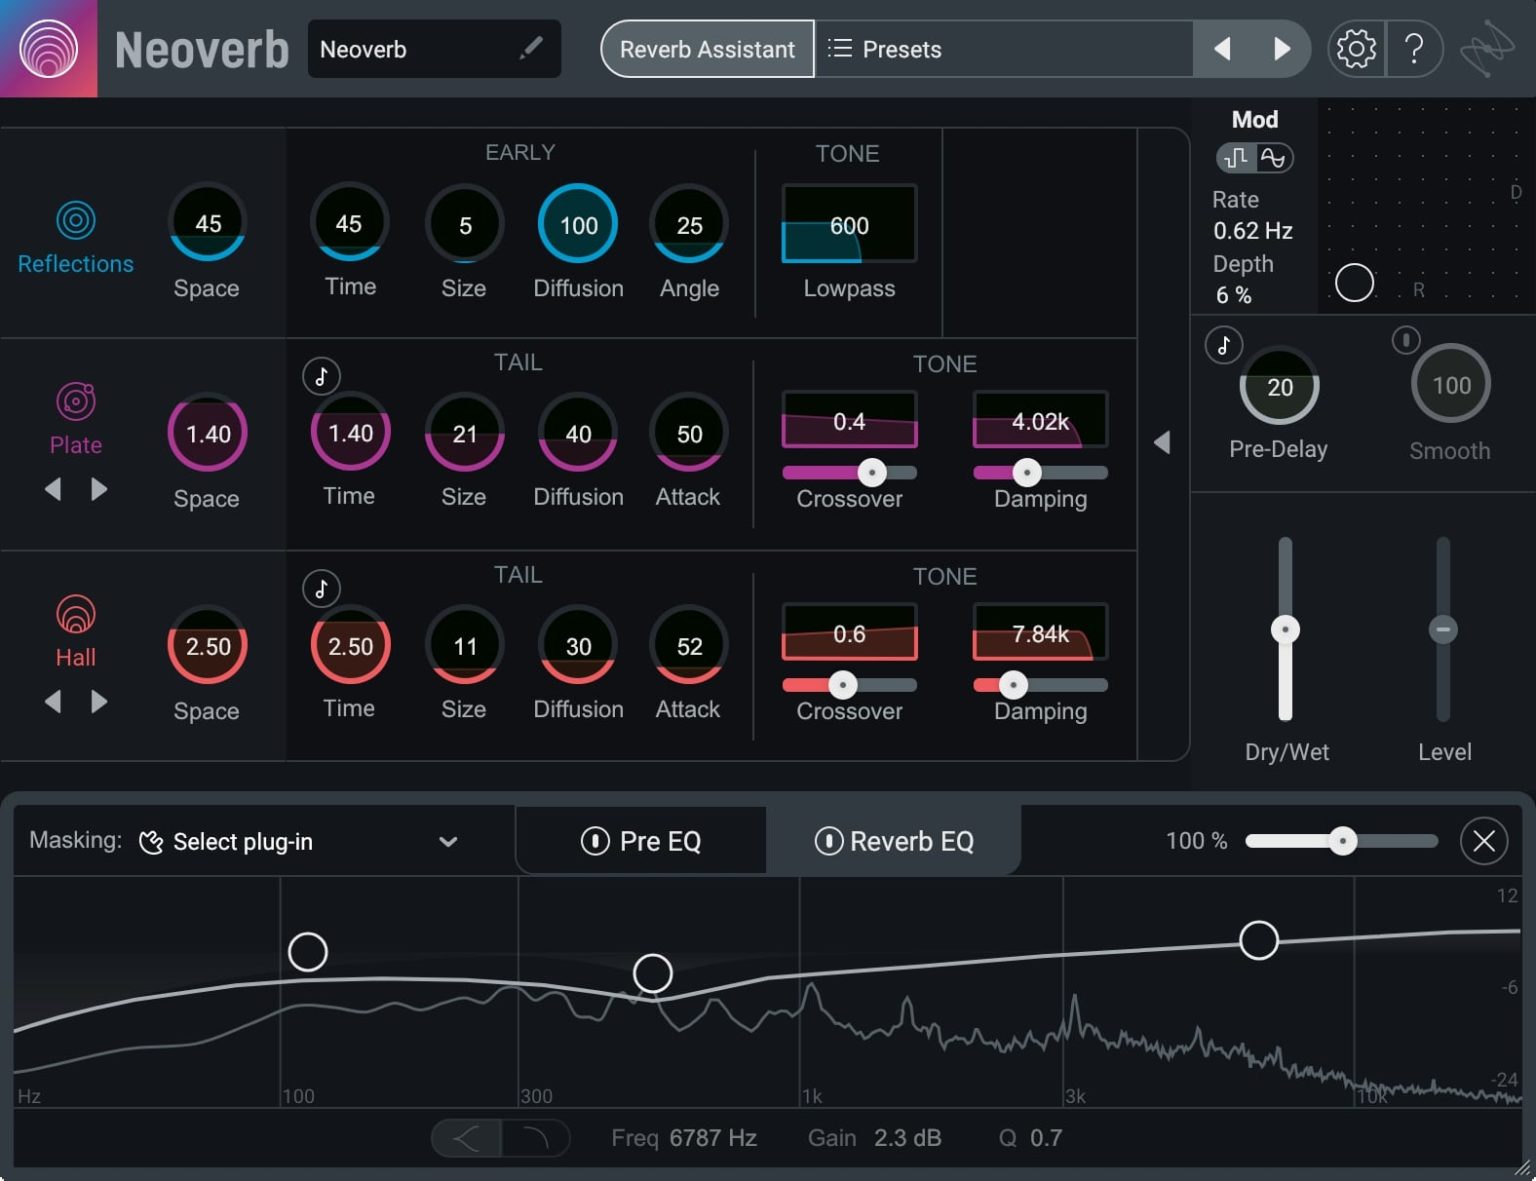 instal the new for ios iZotope Neoverb 1.3.0